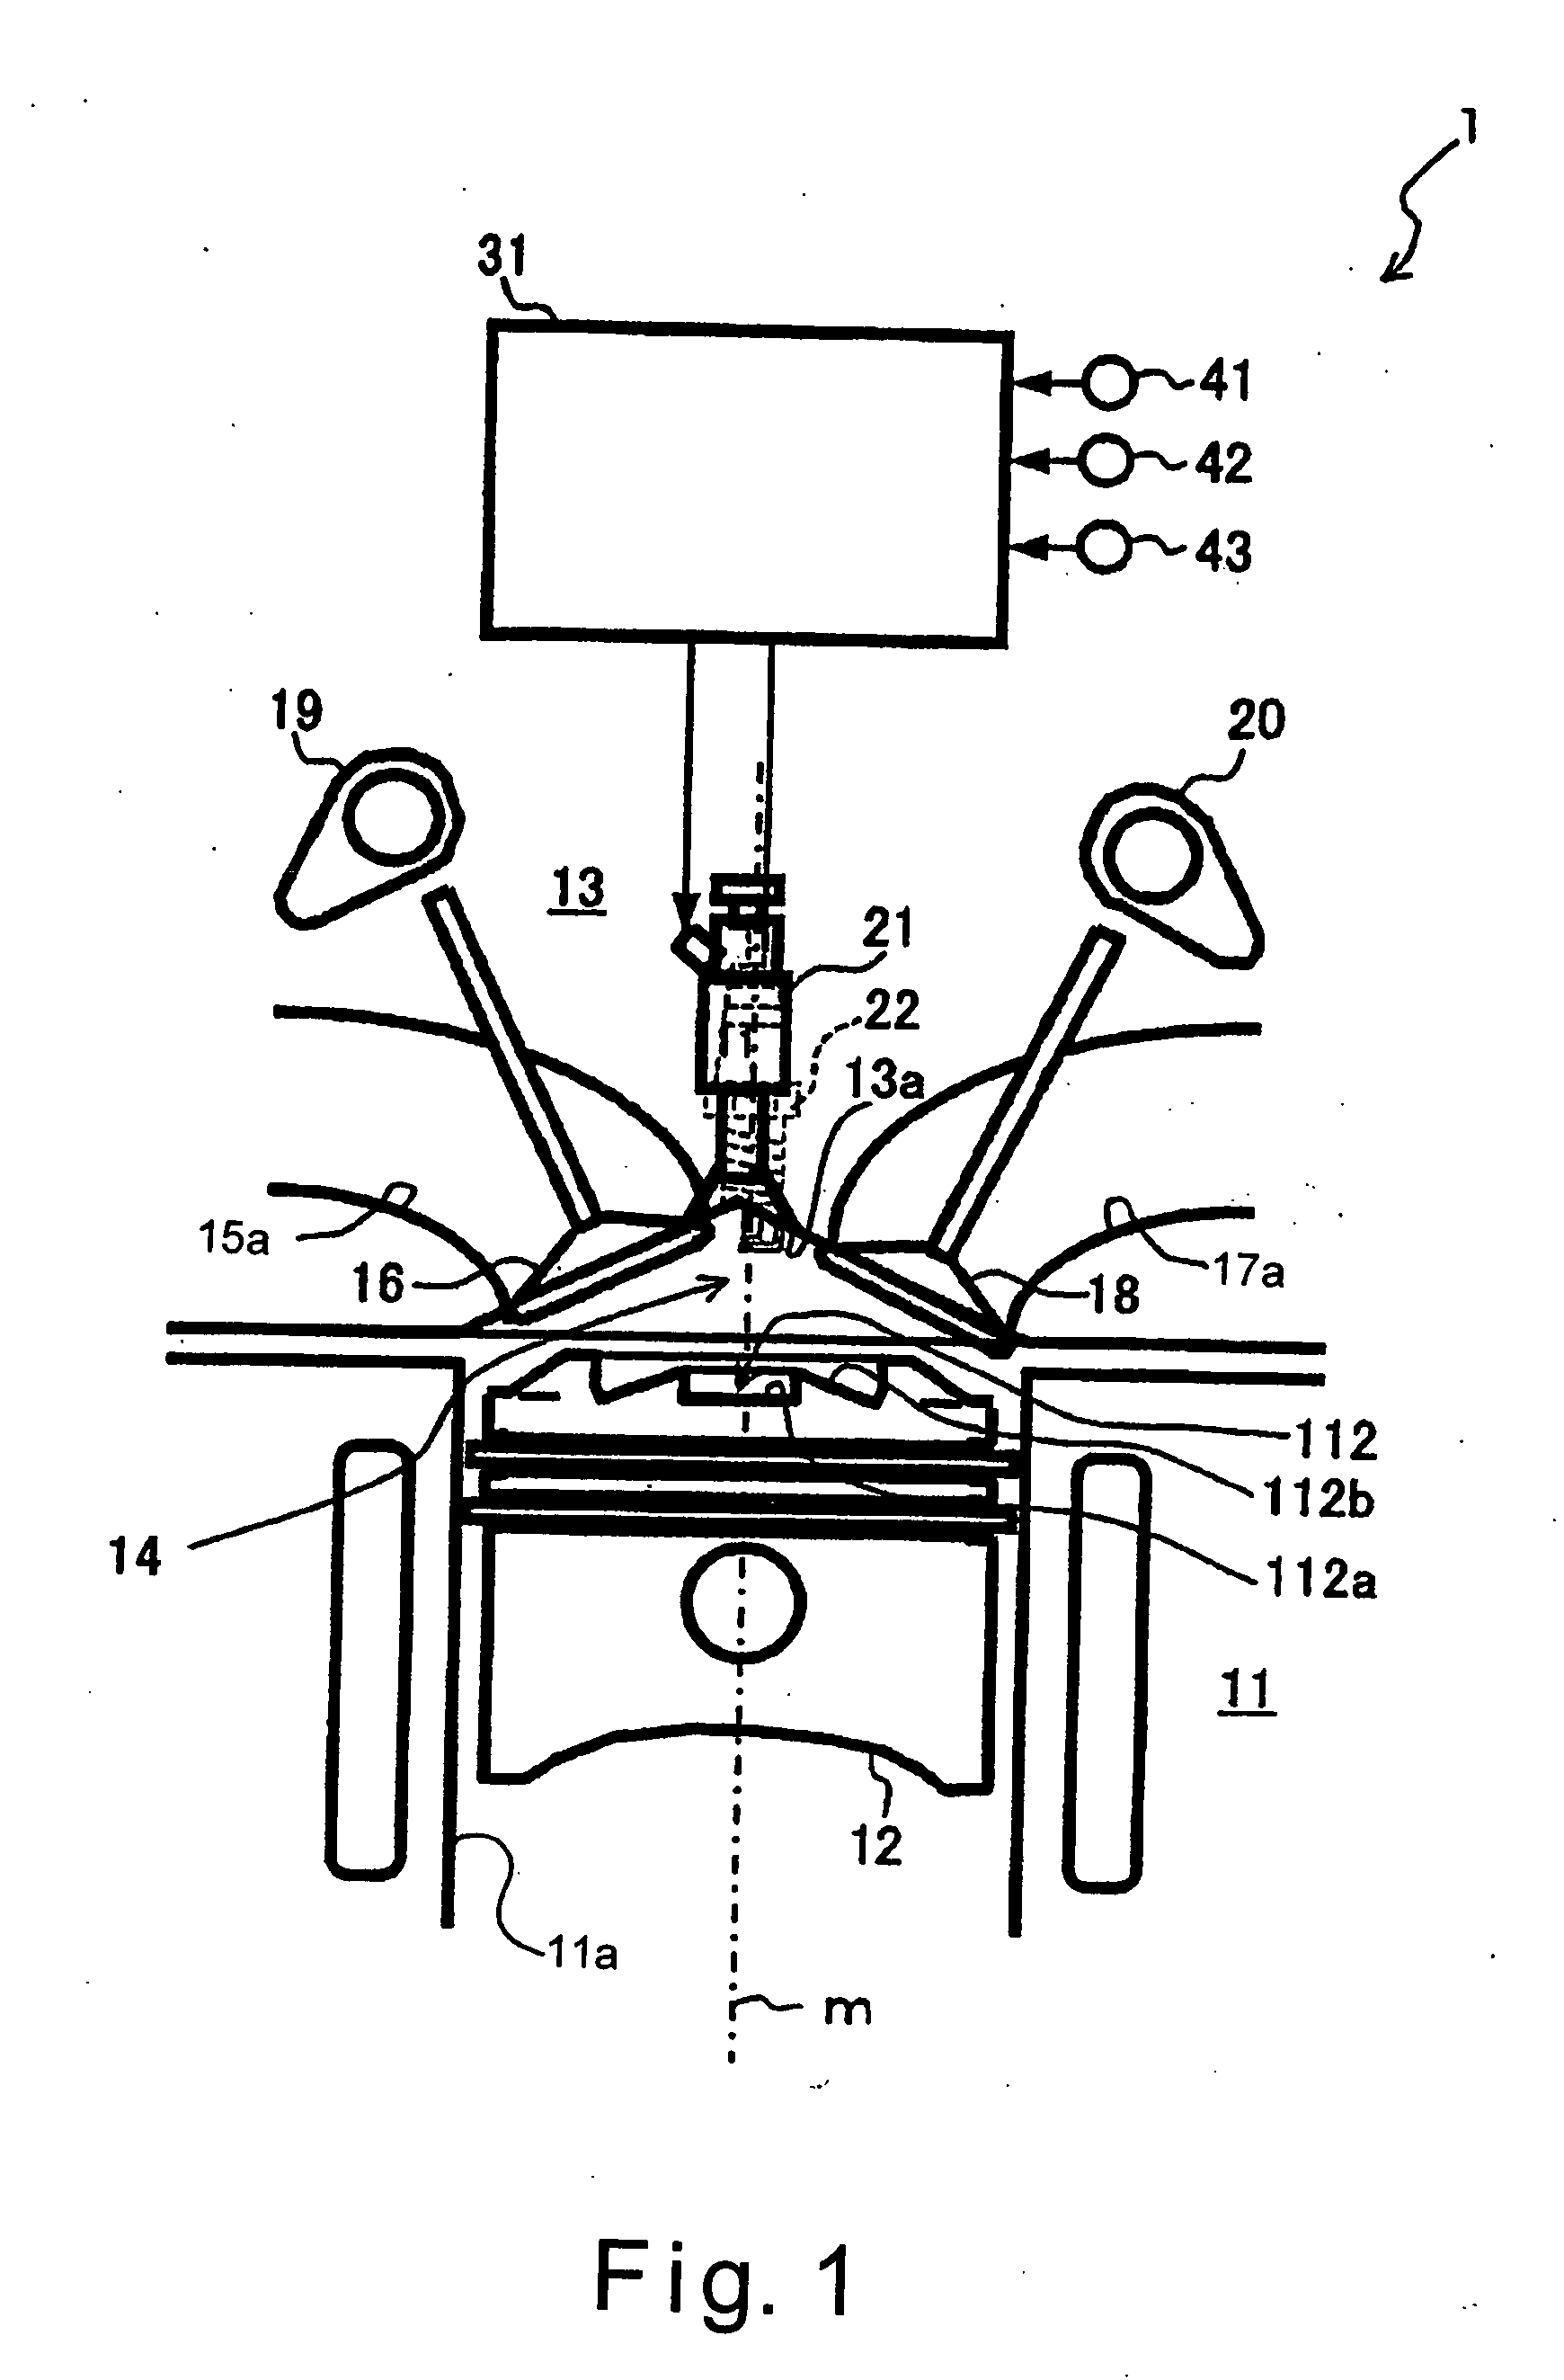 Direct fuel injection internal combustion engine